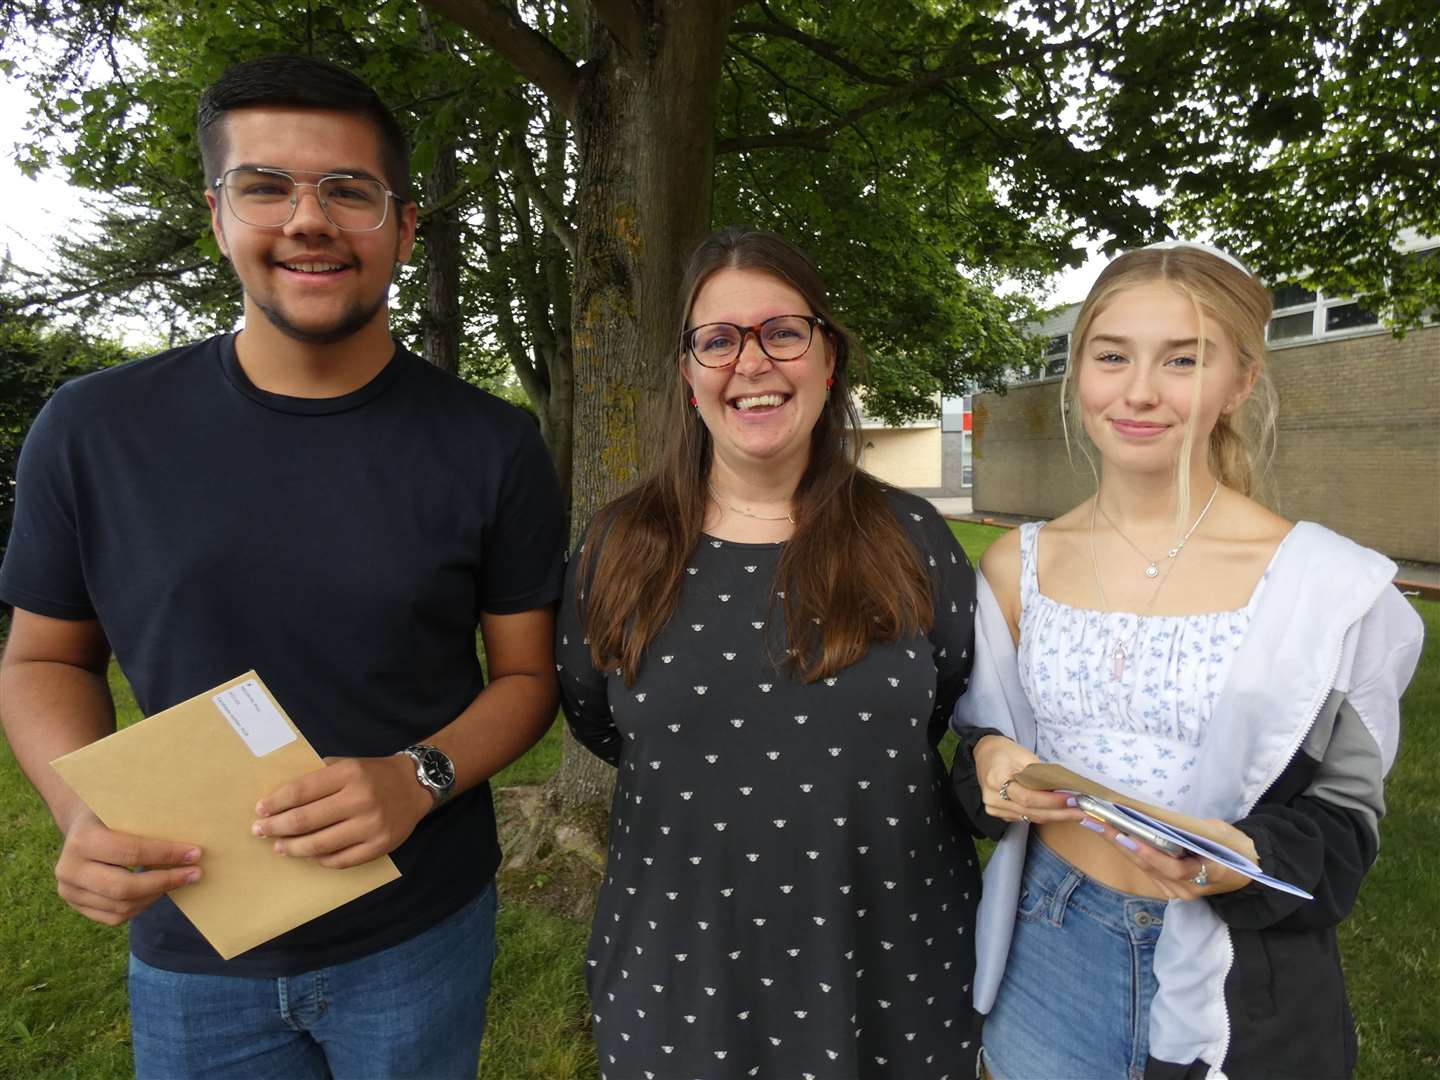 Head of school Susie Burden with Rhys Medwyn and Kiera Hotham as they collected their GCSE results at Fulston Manor School, Sittingbourne